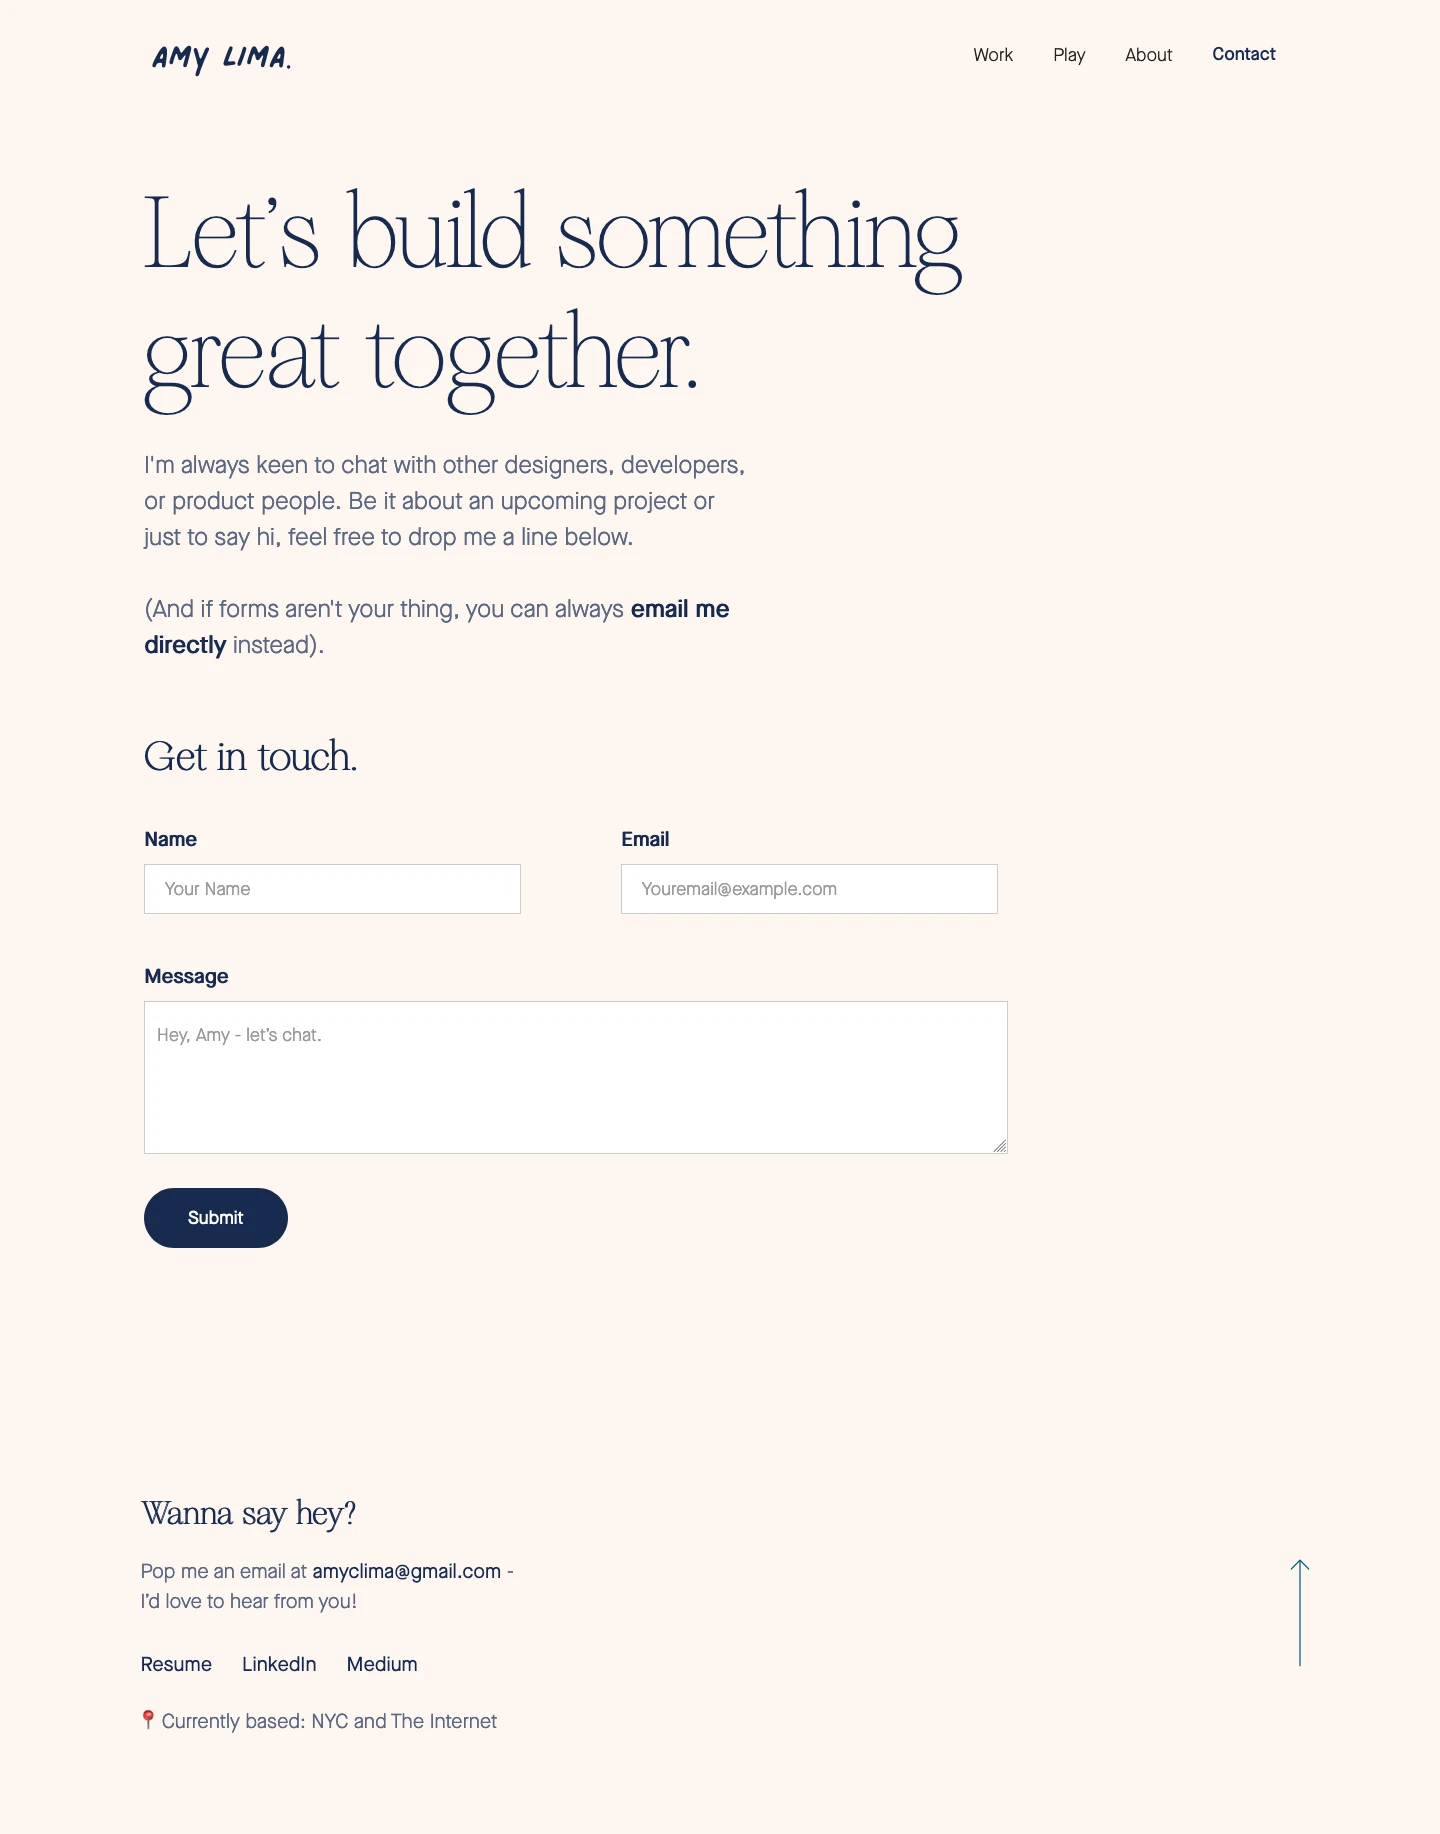 Amy Lima Landing Page Example: I'm a Product Designer and visual thinker passionate about humanizing tech experiences and creating scalable products for community and well being.